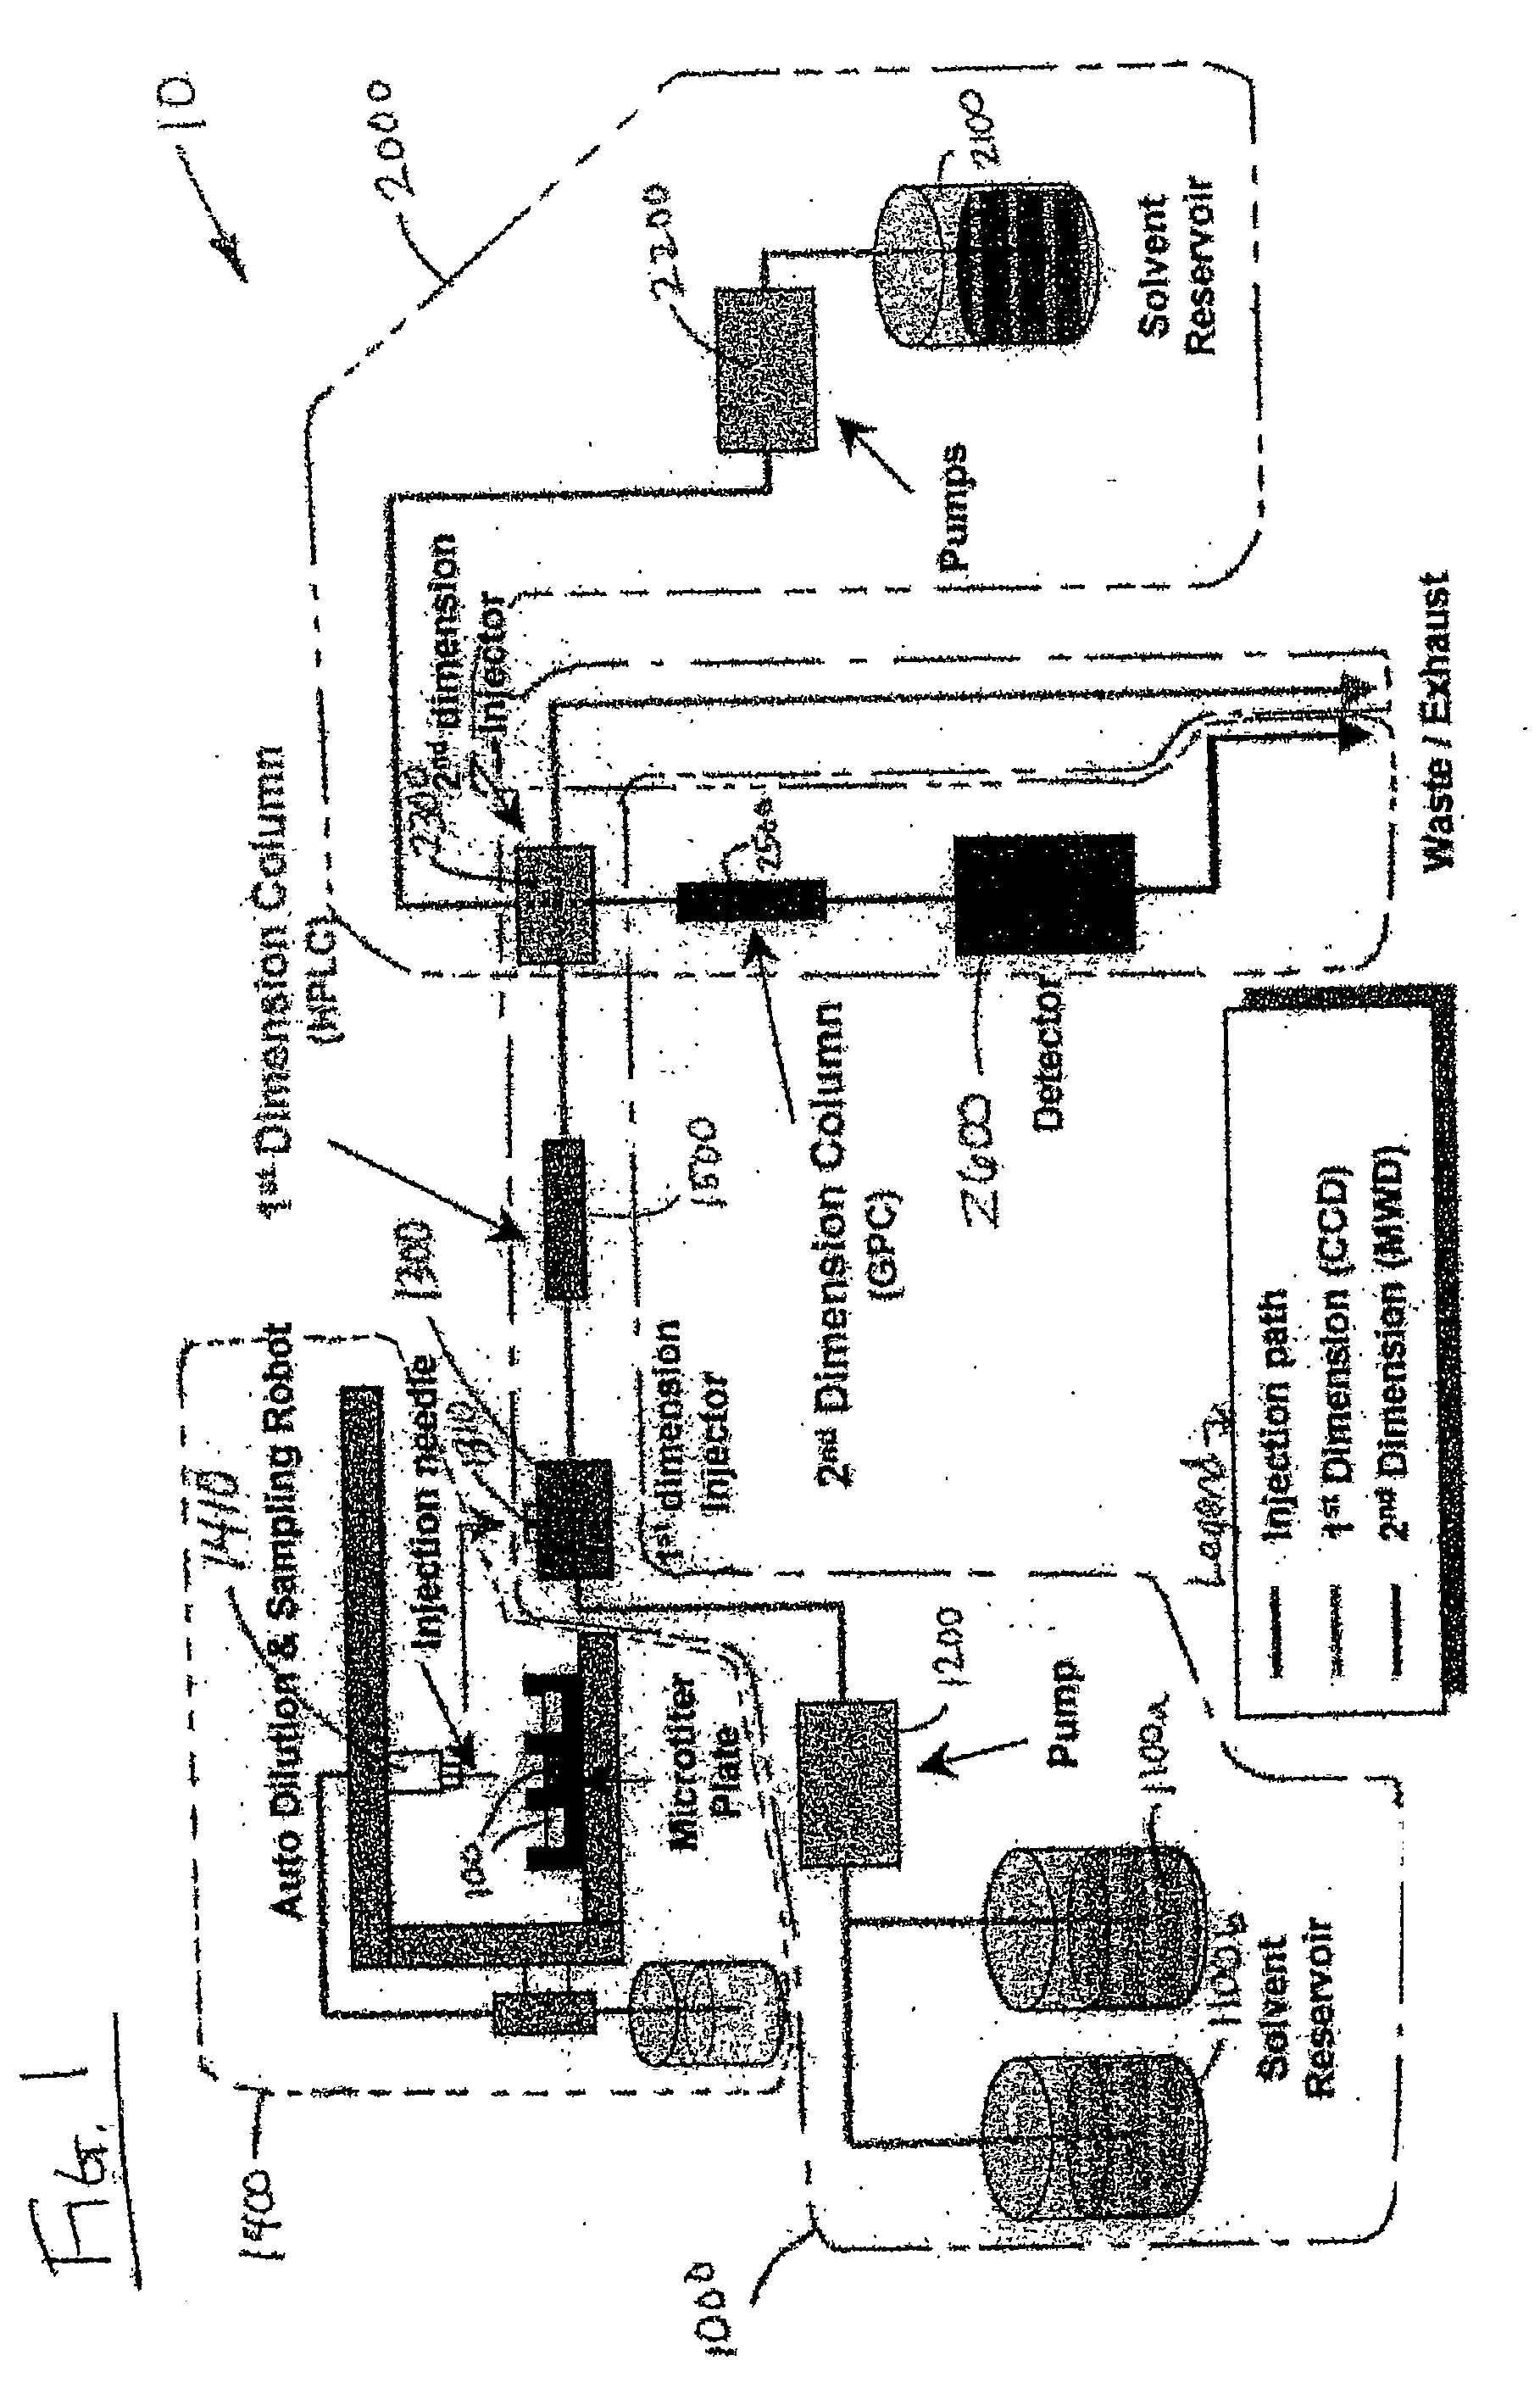 Methods and apparatus for characterization of polymers using multi-dimensional liquid chromatography with regular second-dimension sampling